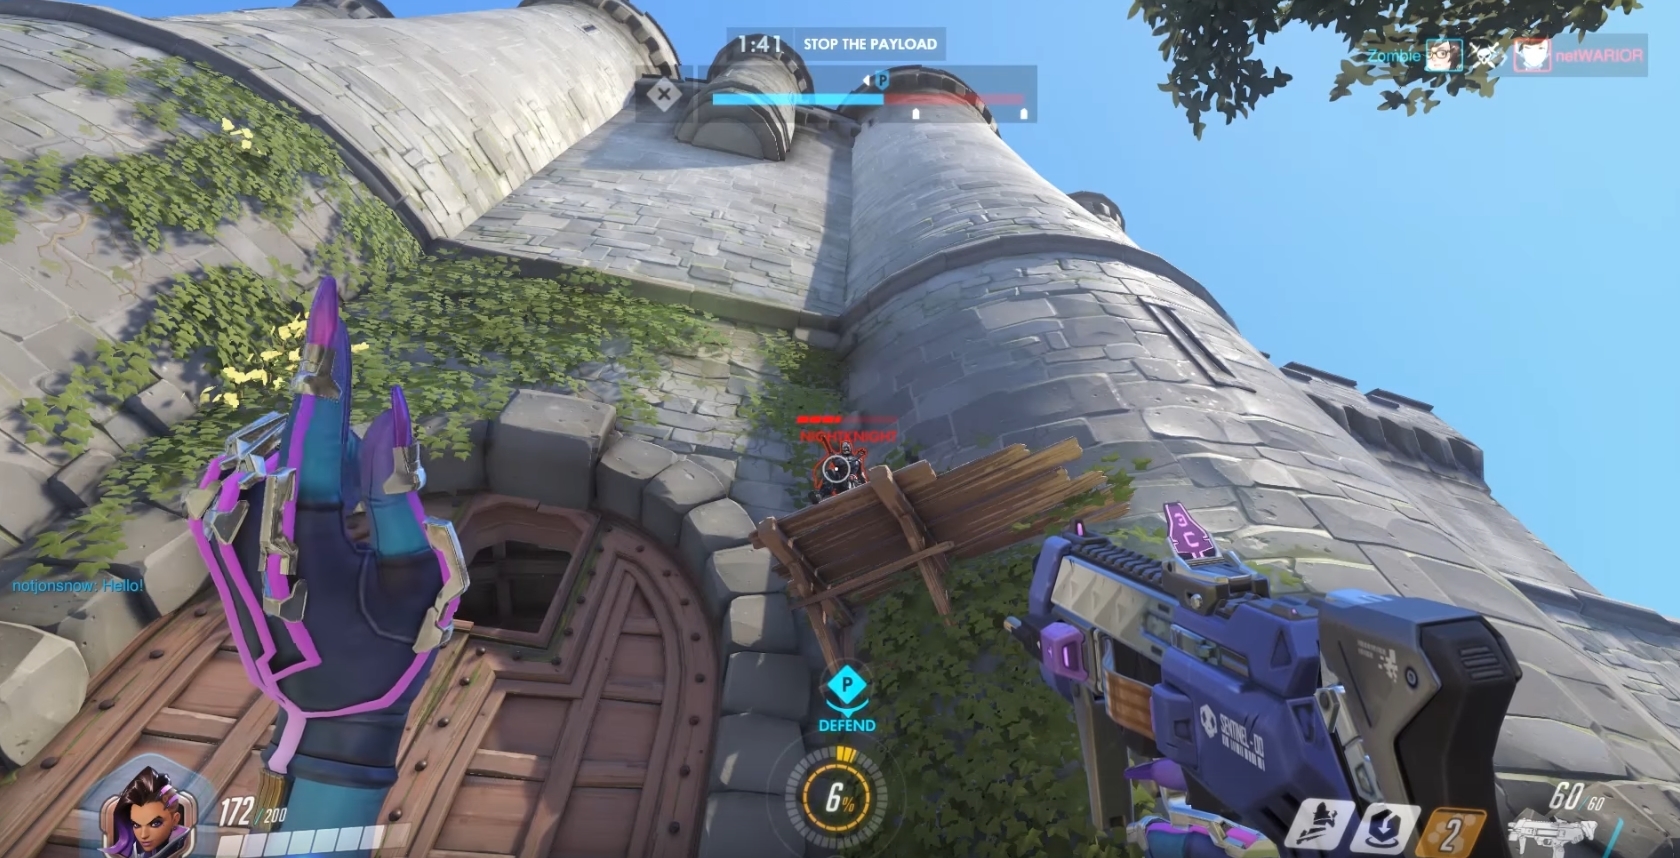 An Overwatch Player Called For A Ceasefire Just When I Needed It